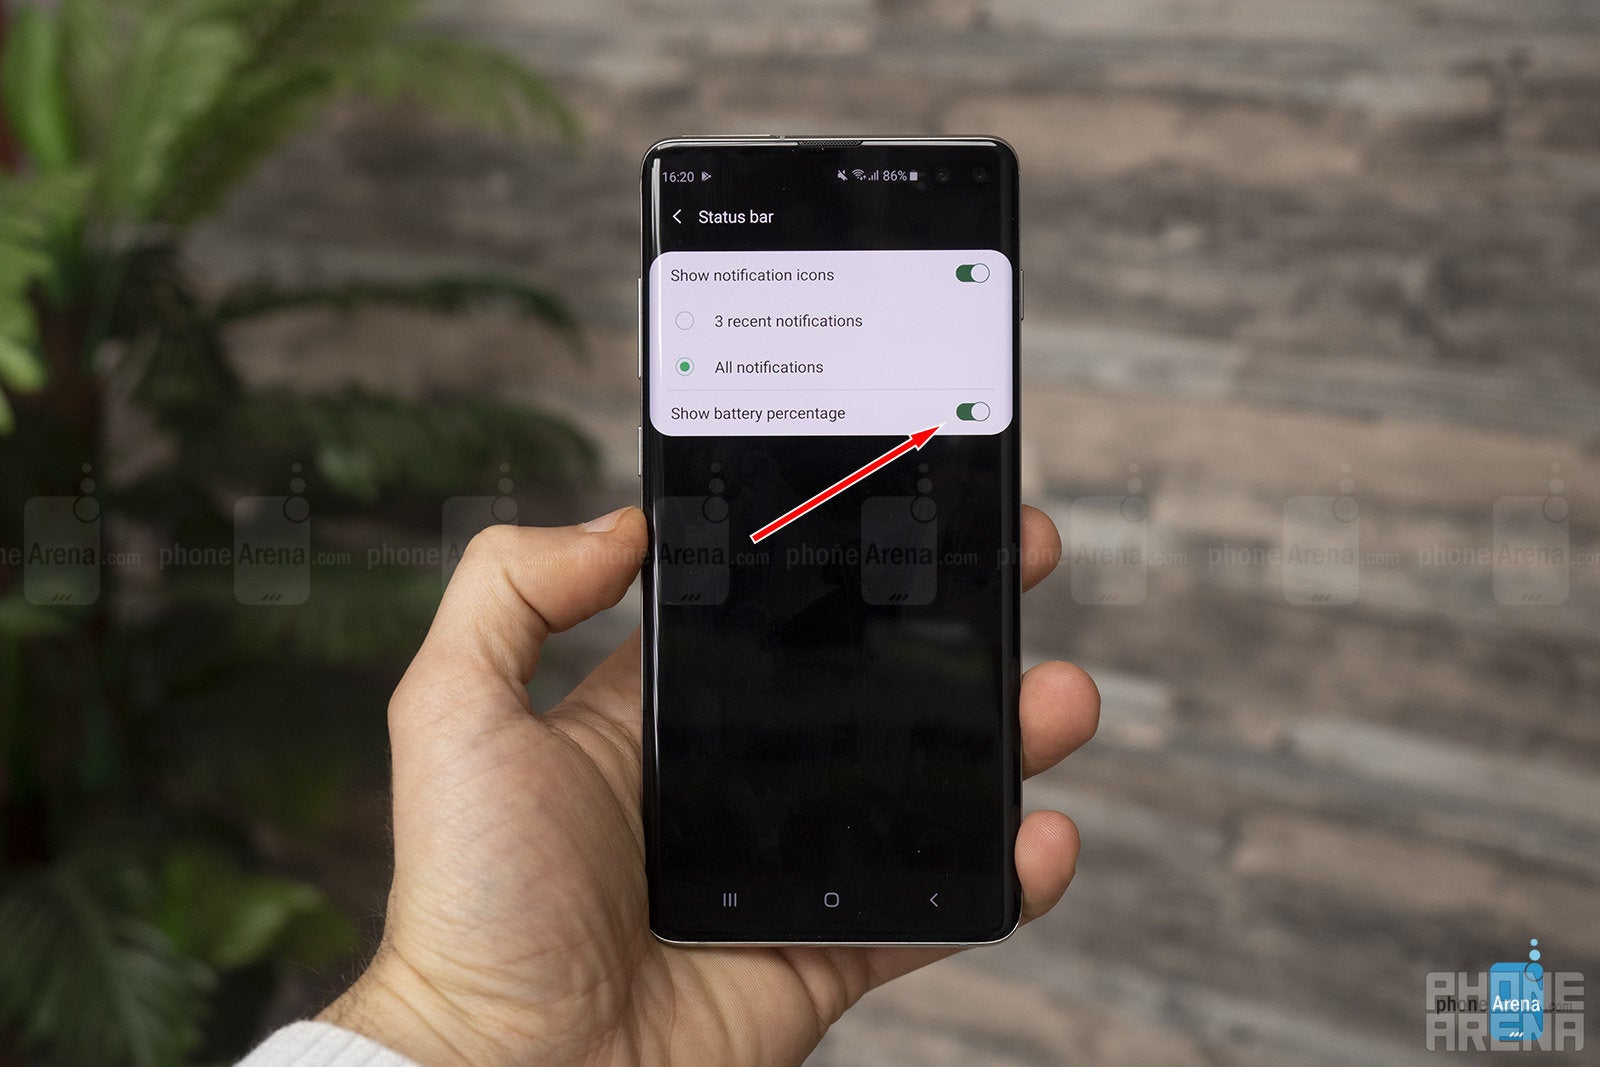 How to show battery percentage on Galaxy S10, S10 Plus and S10e